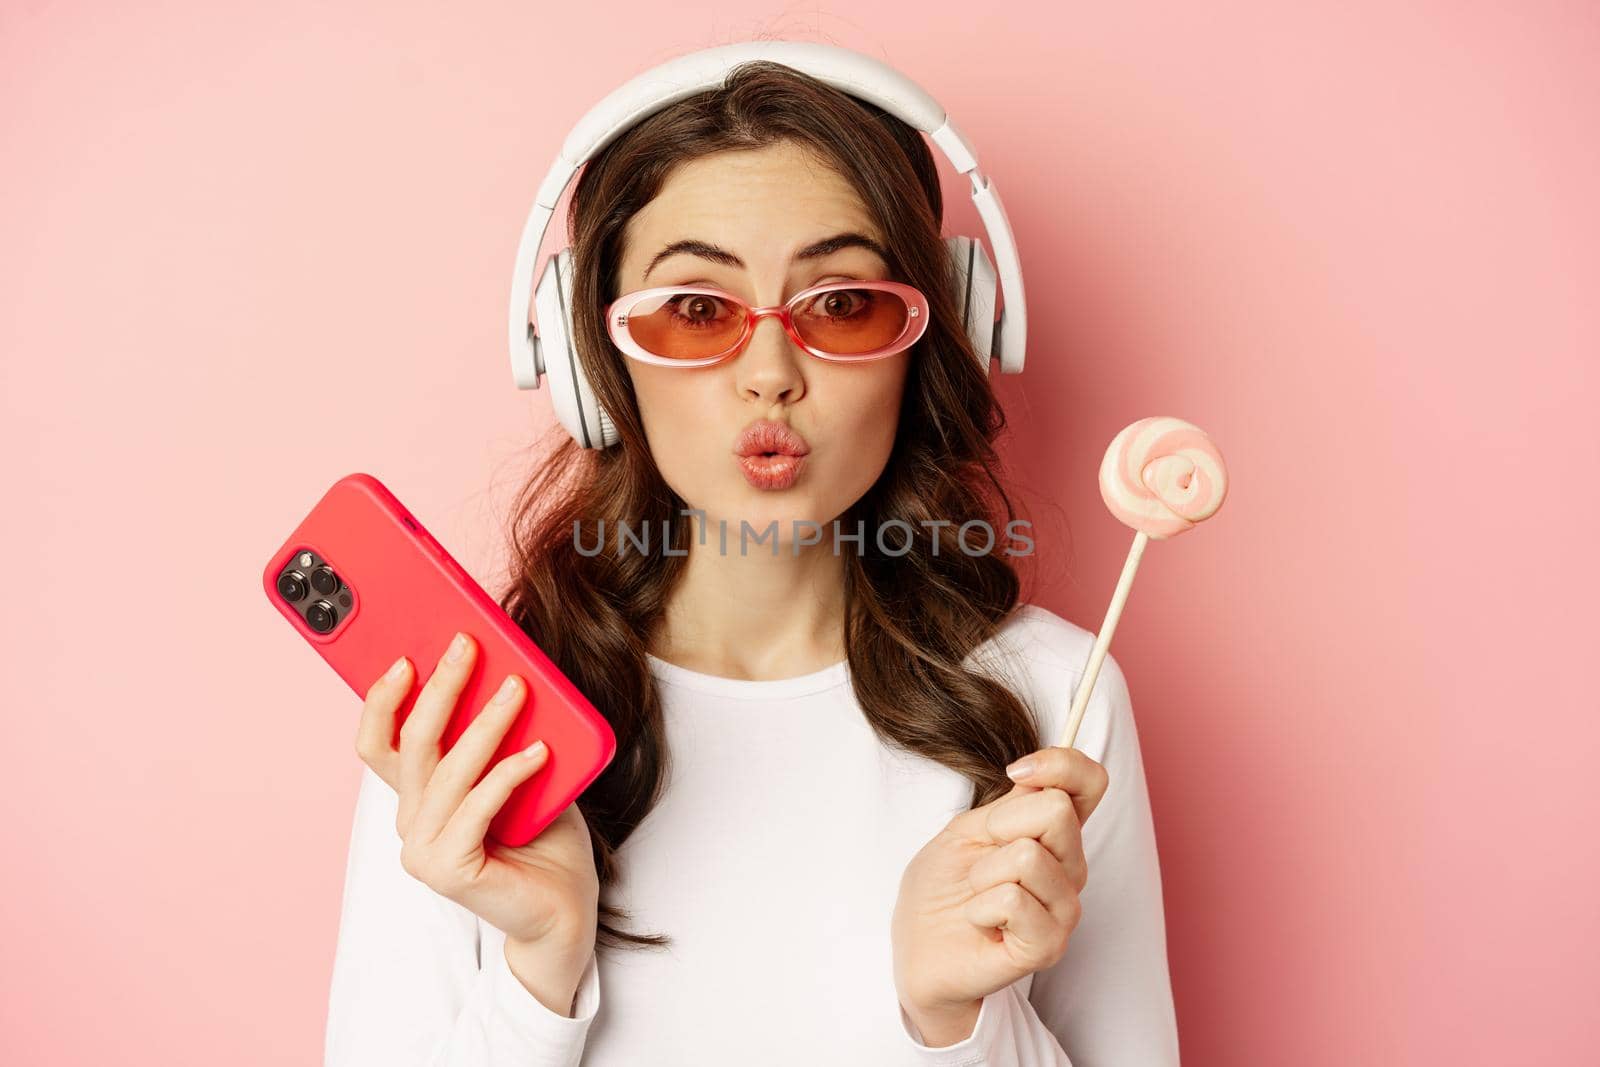 Stylish young woman with lolipop and cellphone, wearing sunglasses and headphones, listening music, standing over pink background.